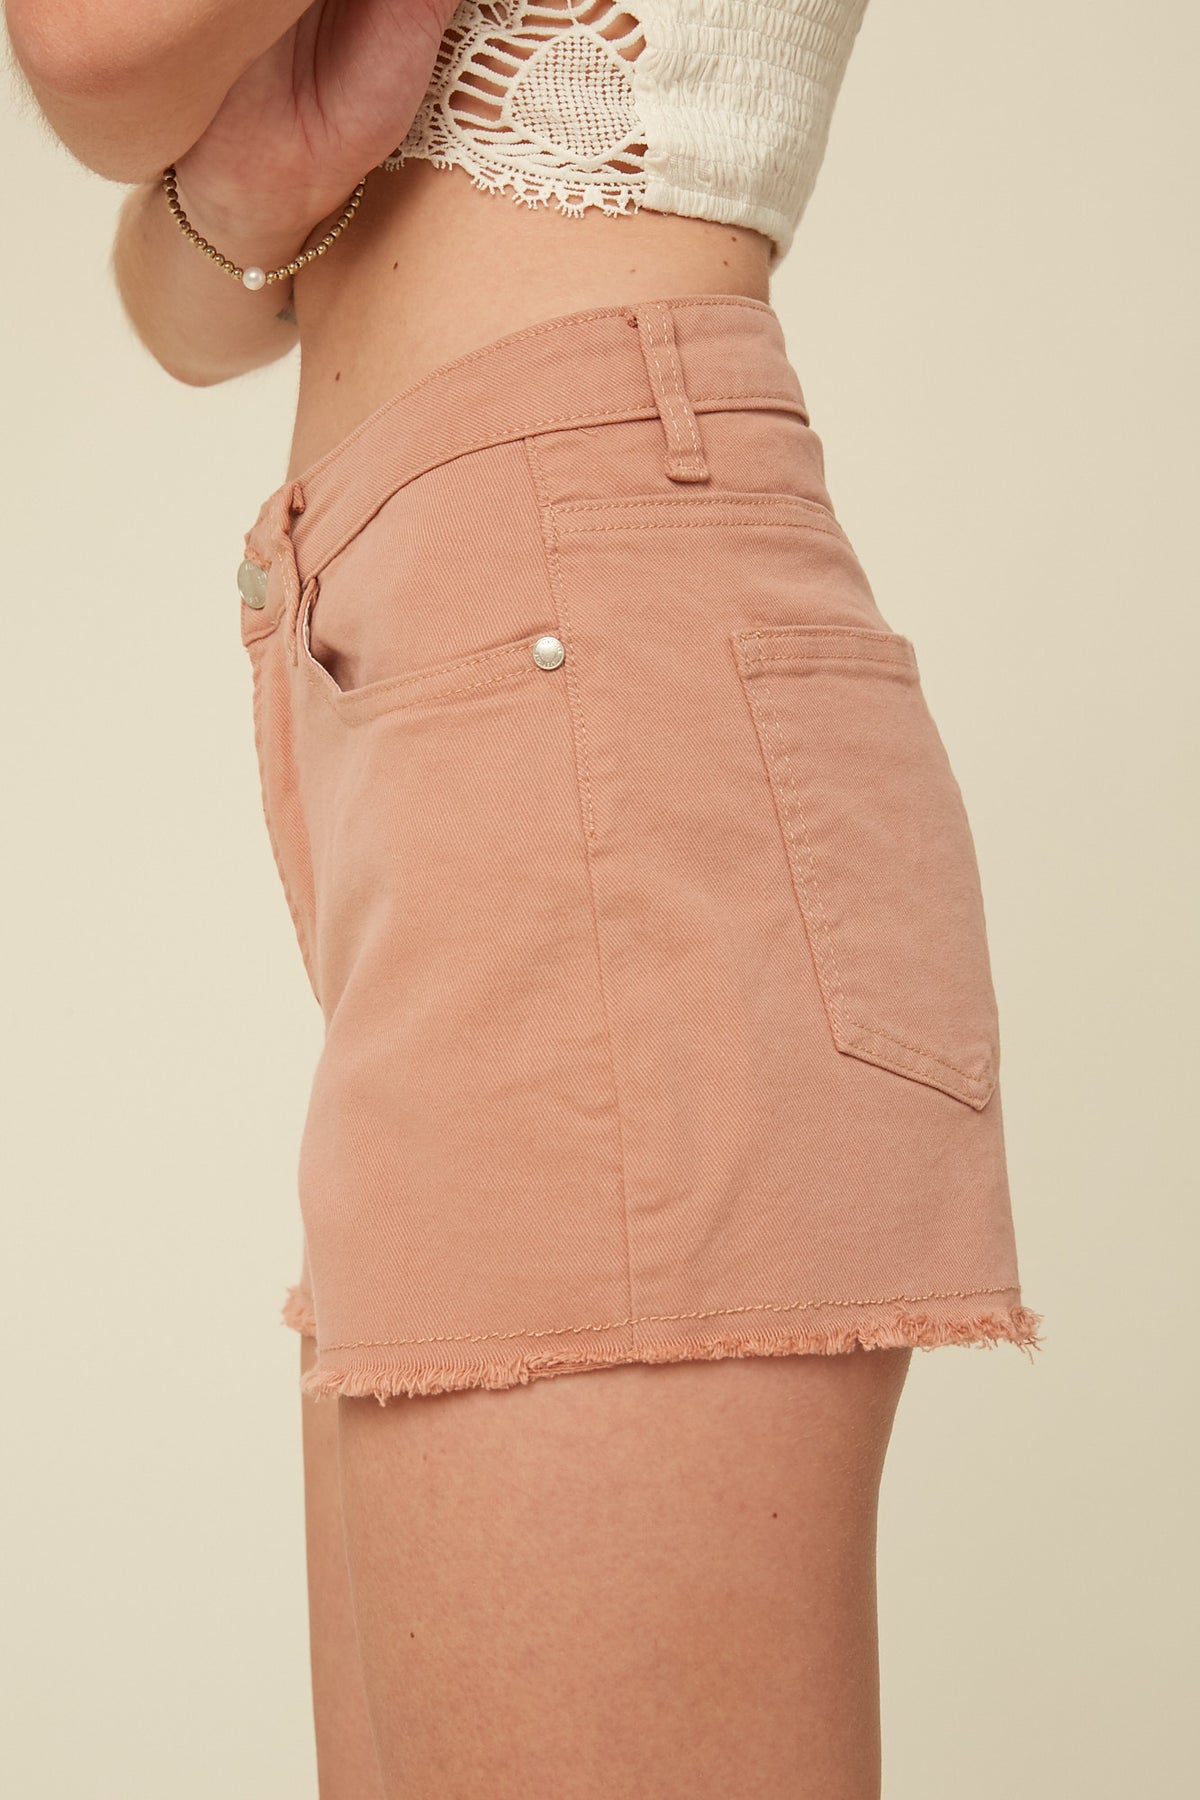 Vintage Inspired Cut-Off Shorts